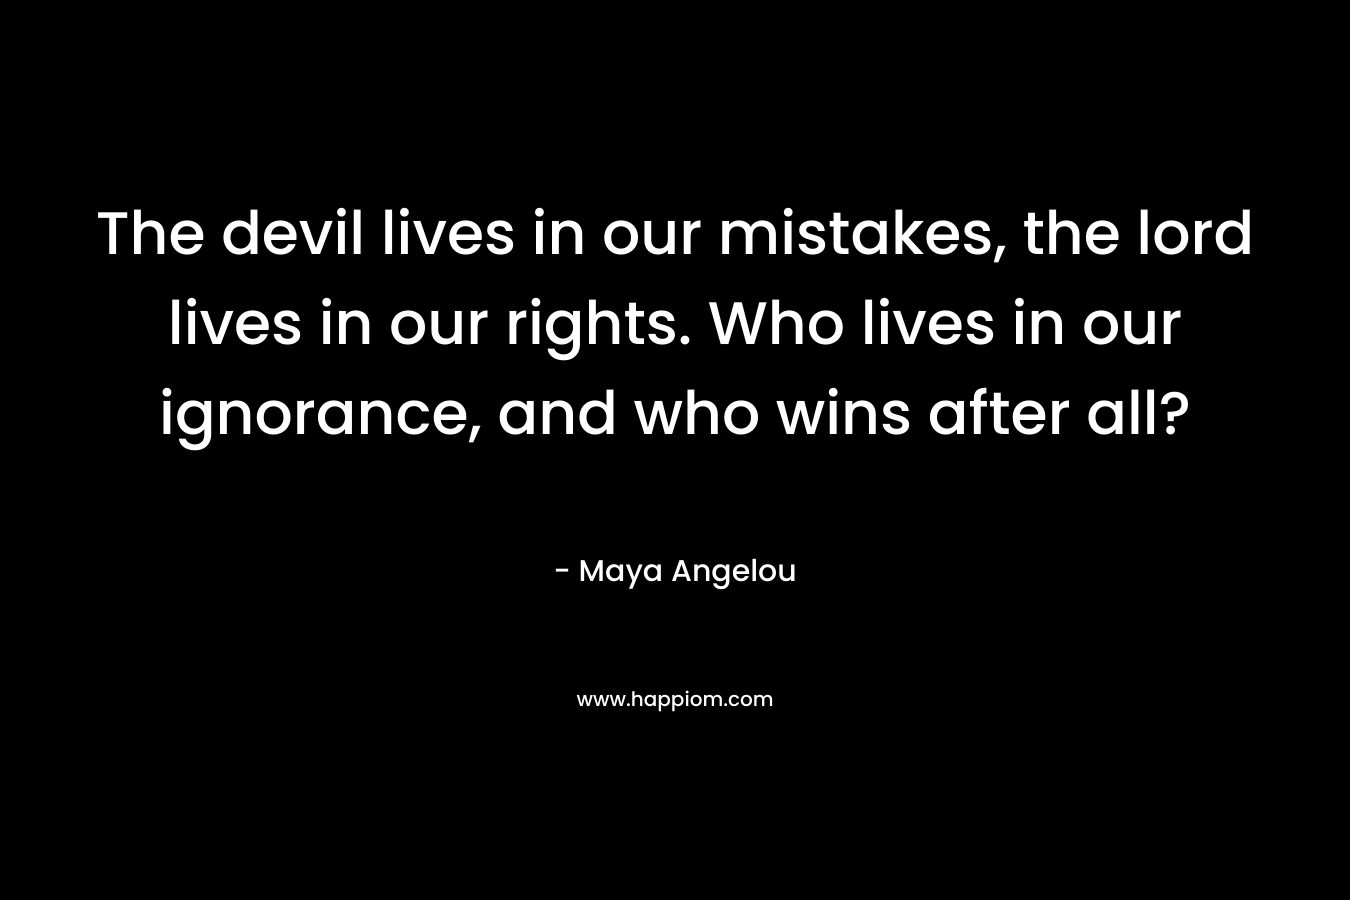 The devil lives in our mistakes, the lord lives in our rights. Who lives in our ignorance, and who wins after all?